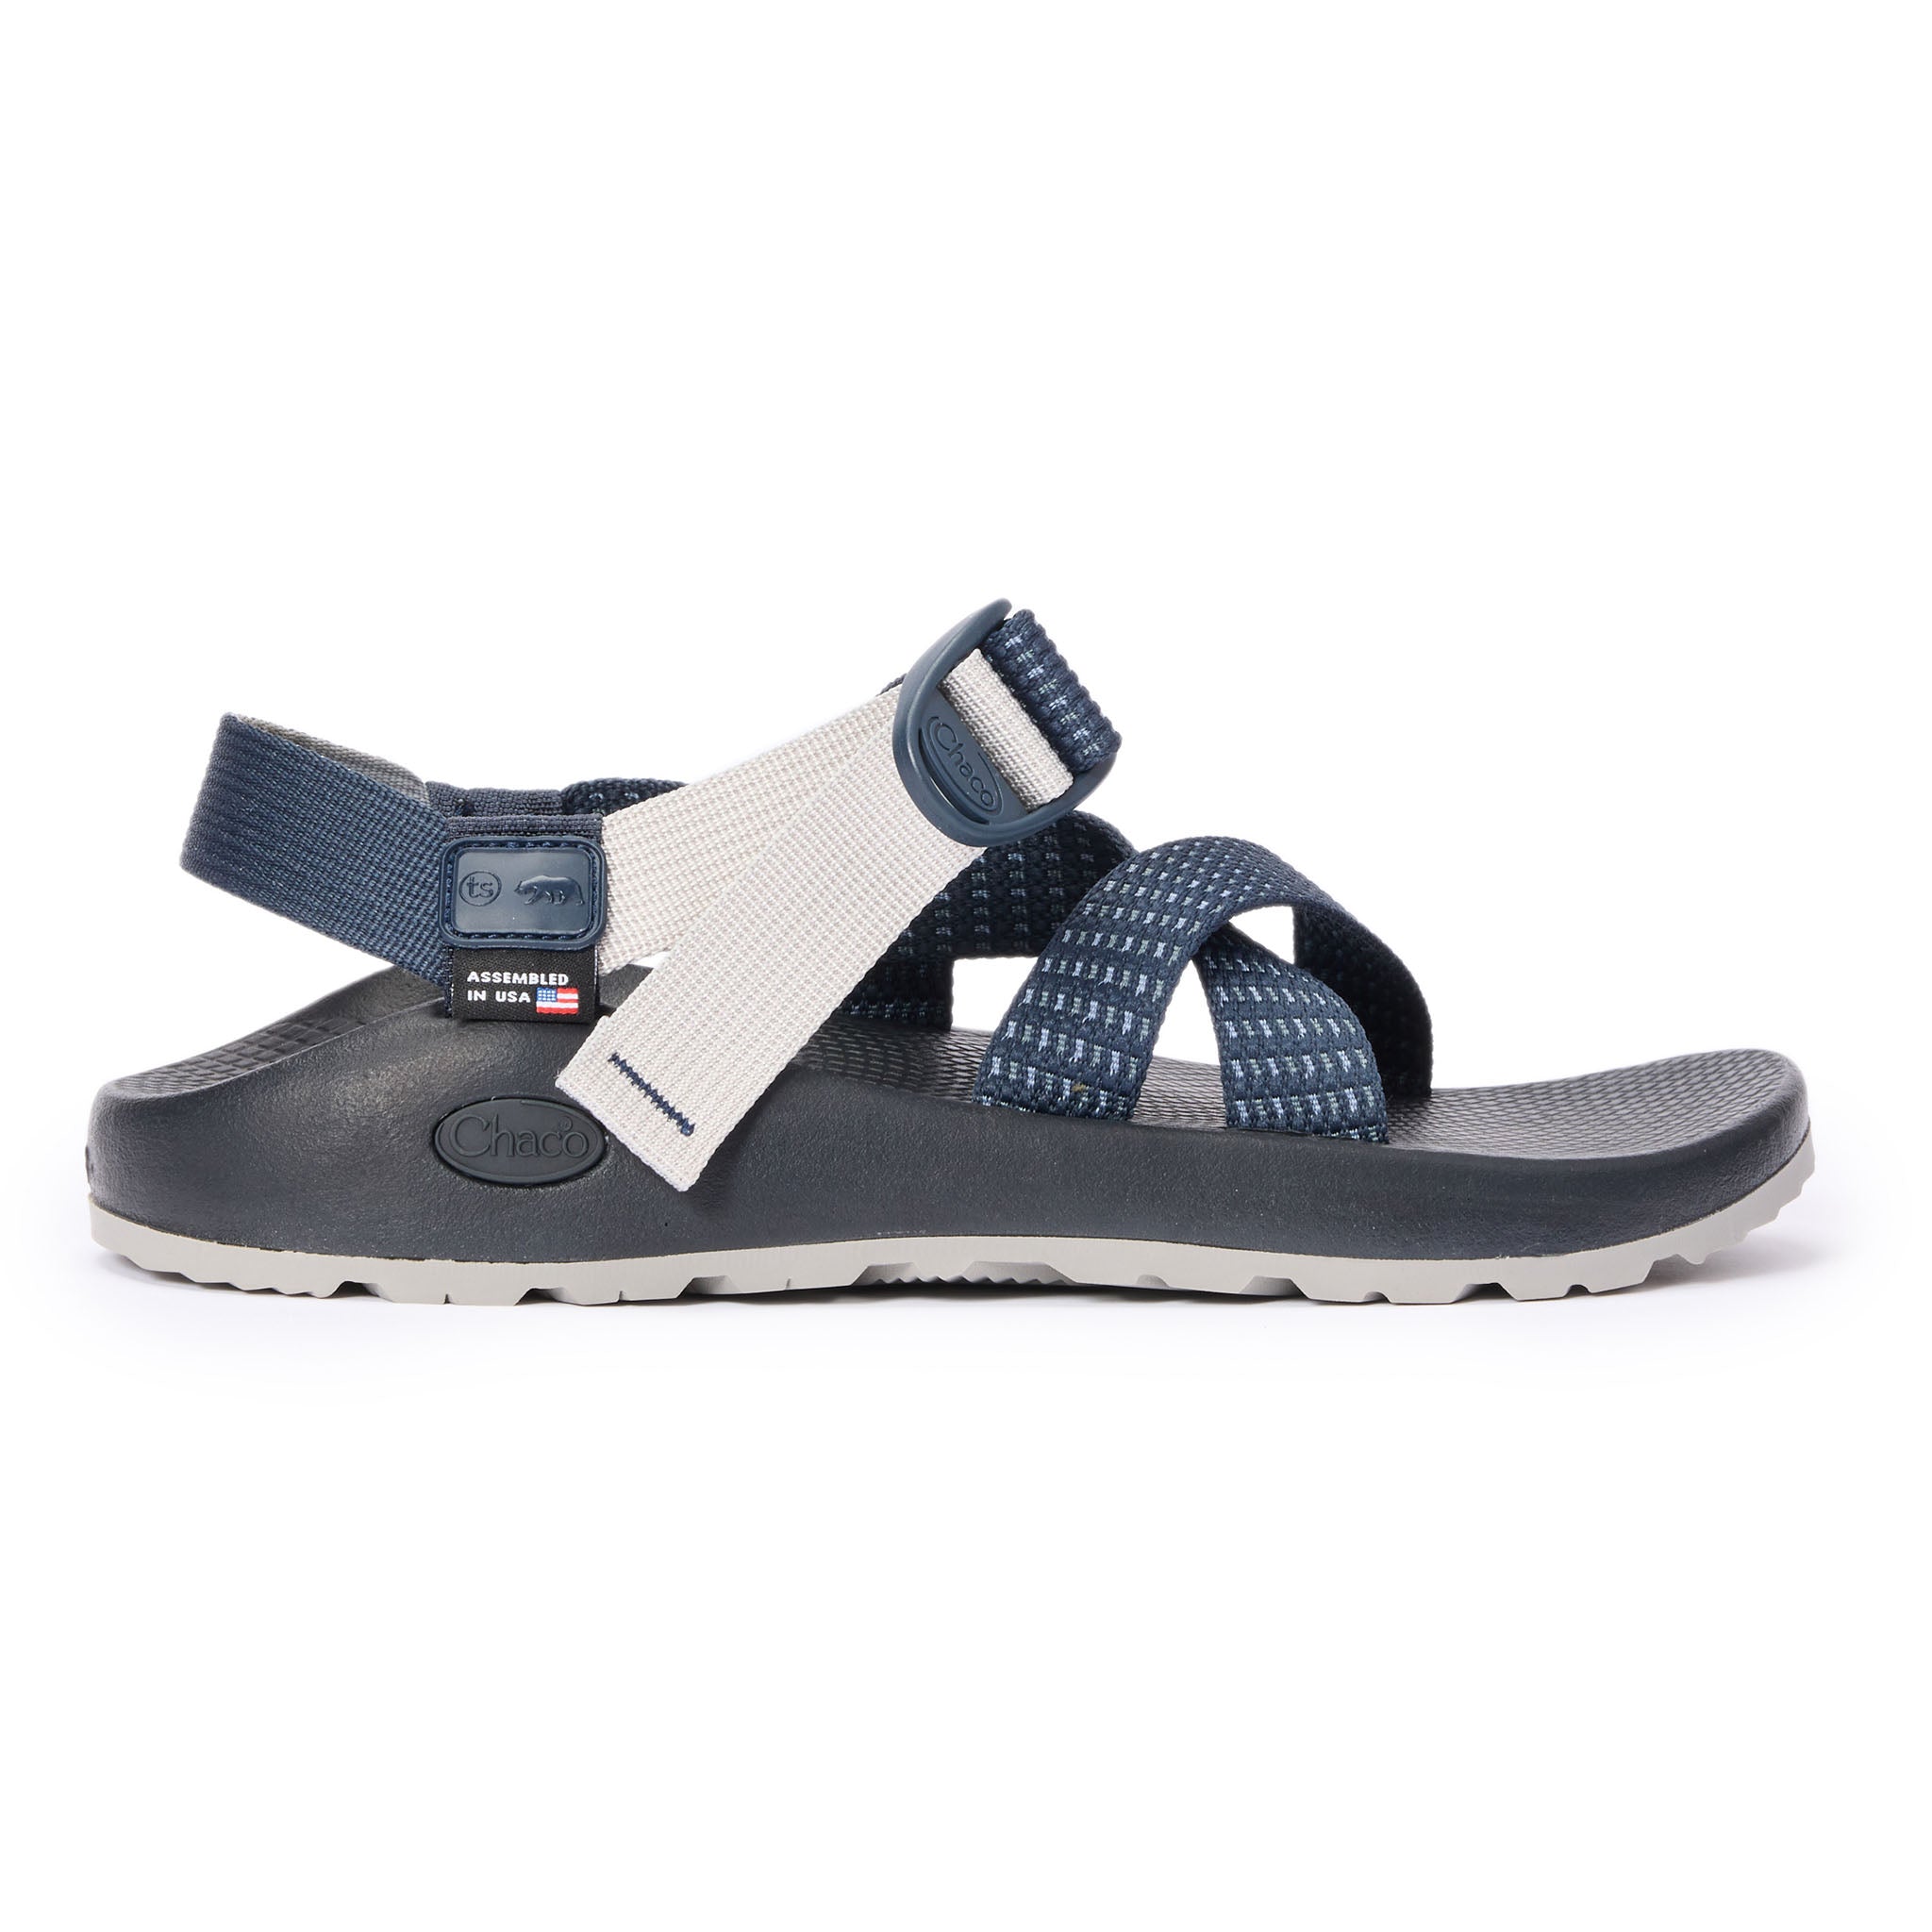 Taylor Stitch x Chaco Sandal - The Z/1 USA Classic in Navy Waffle